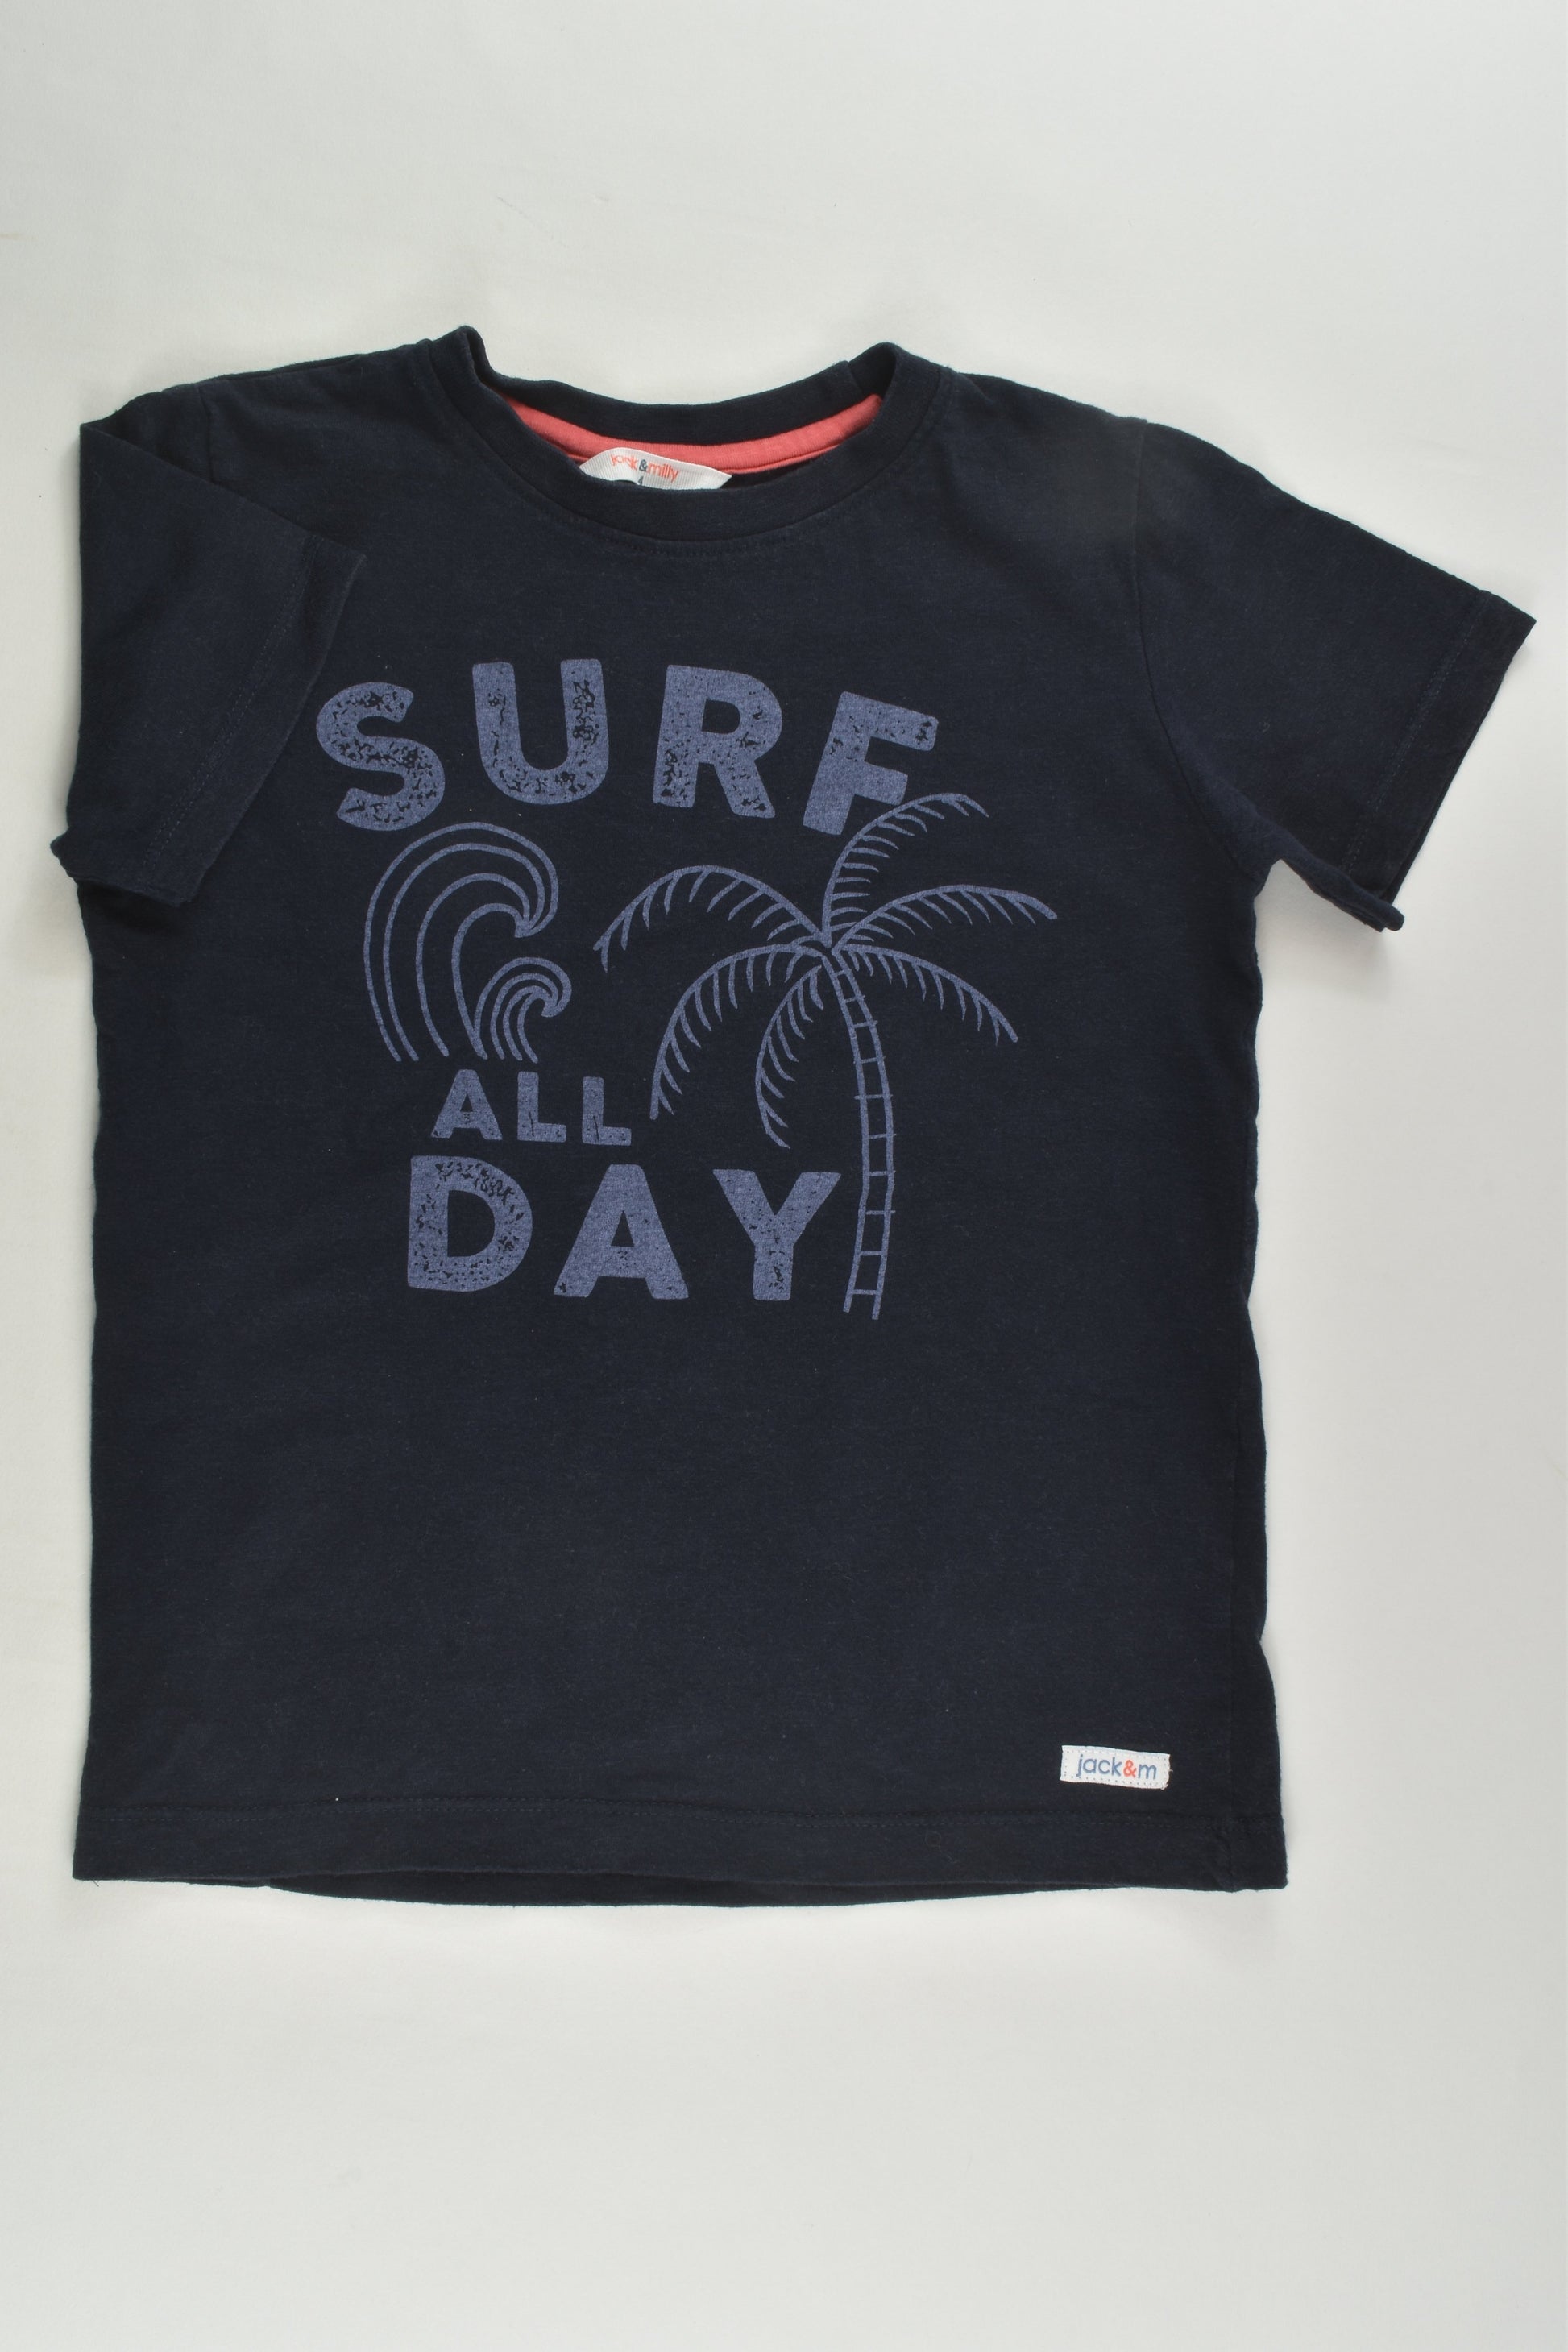 Jack & Milly Size 4 'Surf All Day' T-shirt